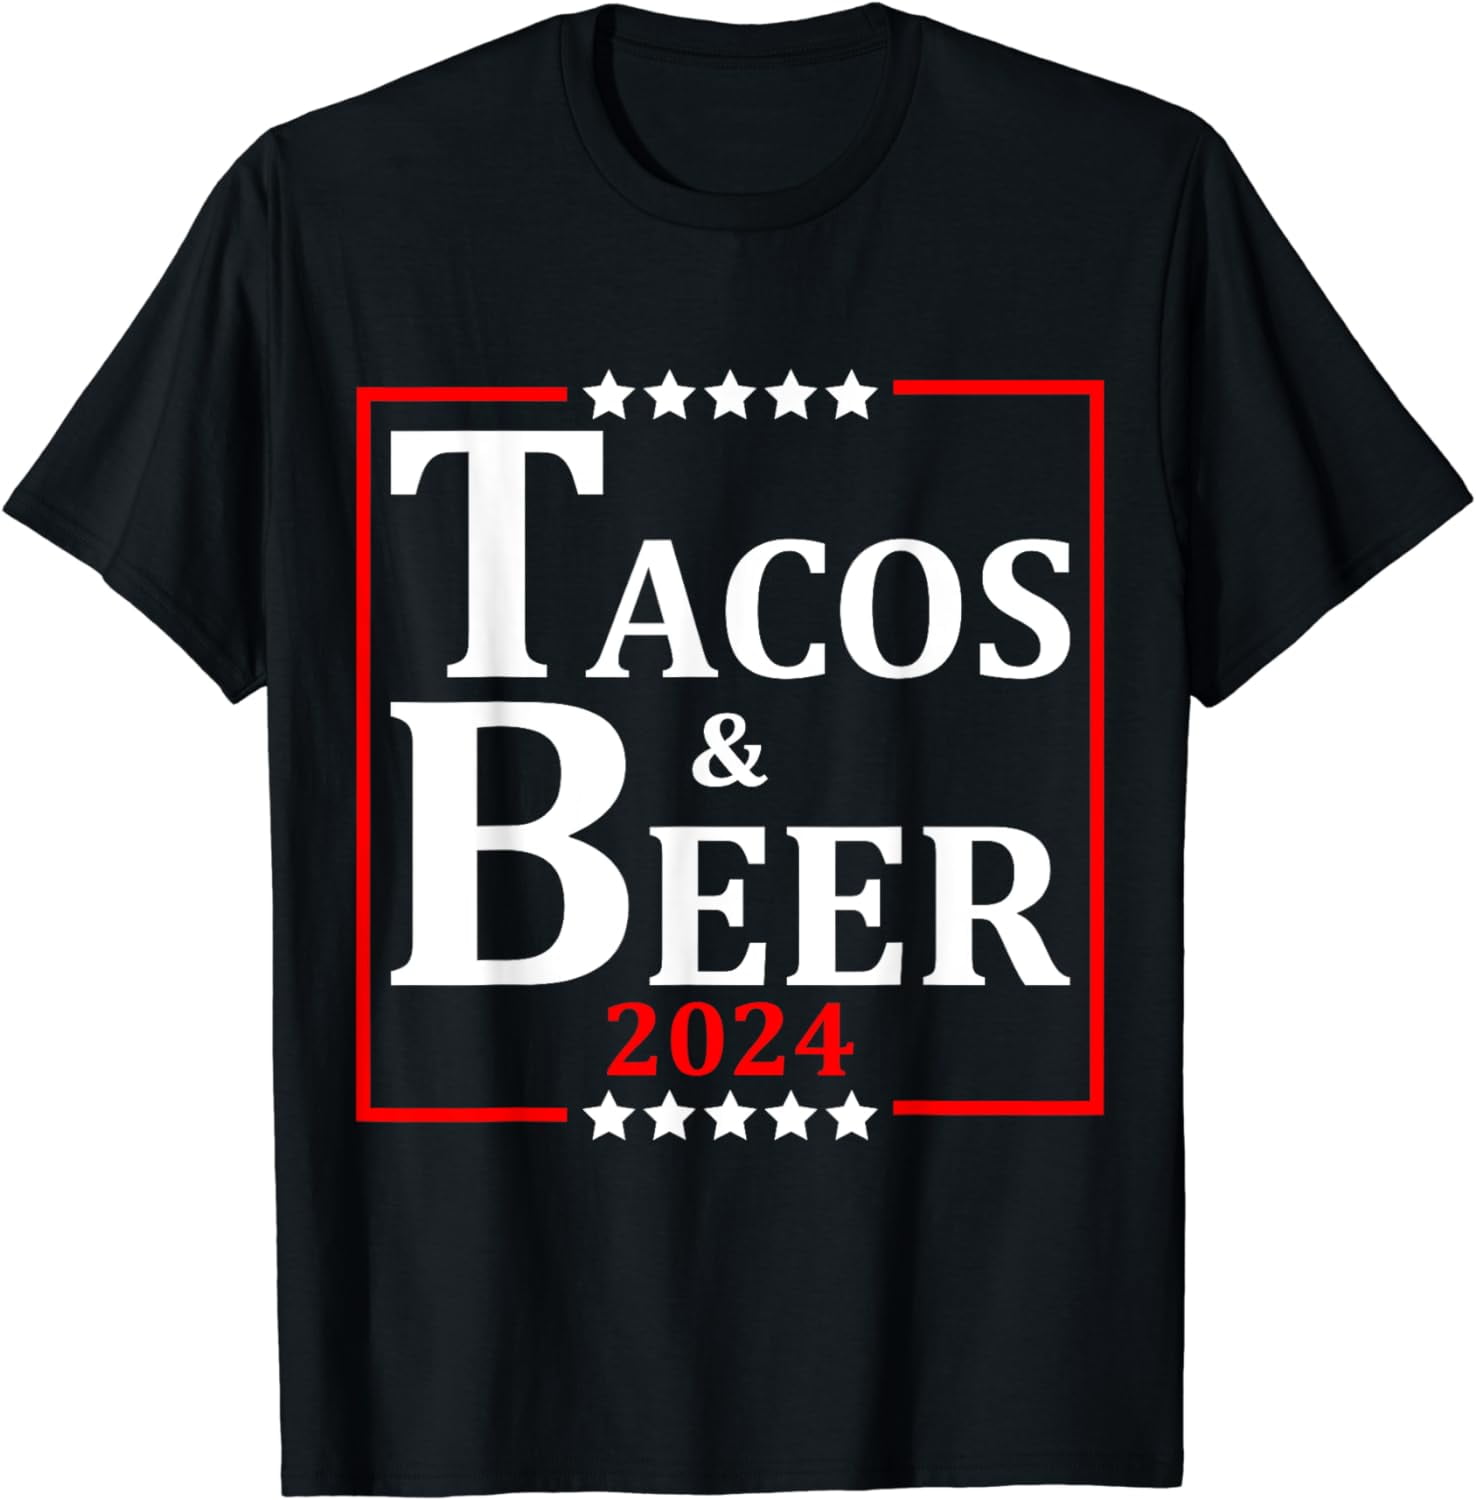 Tacos & Beer 2024 Funny Presidential Election Party T-Shirt - Walmart.com